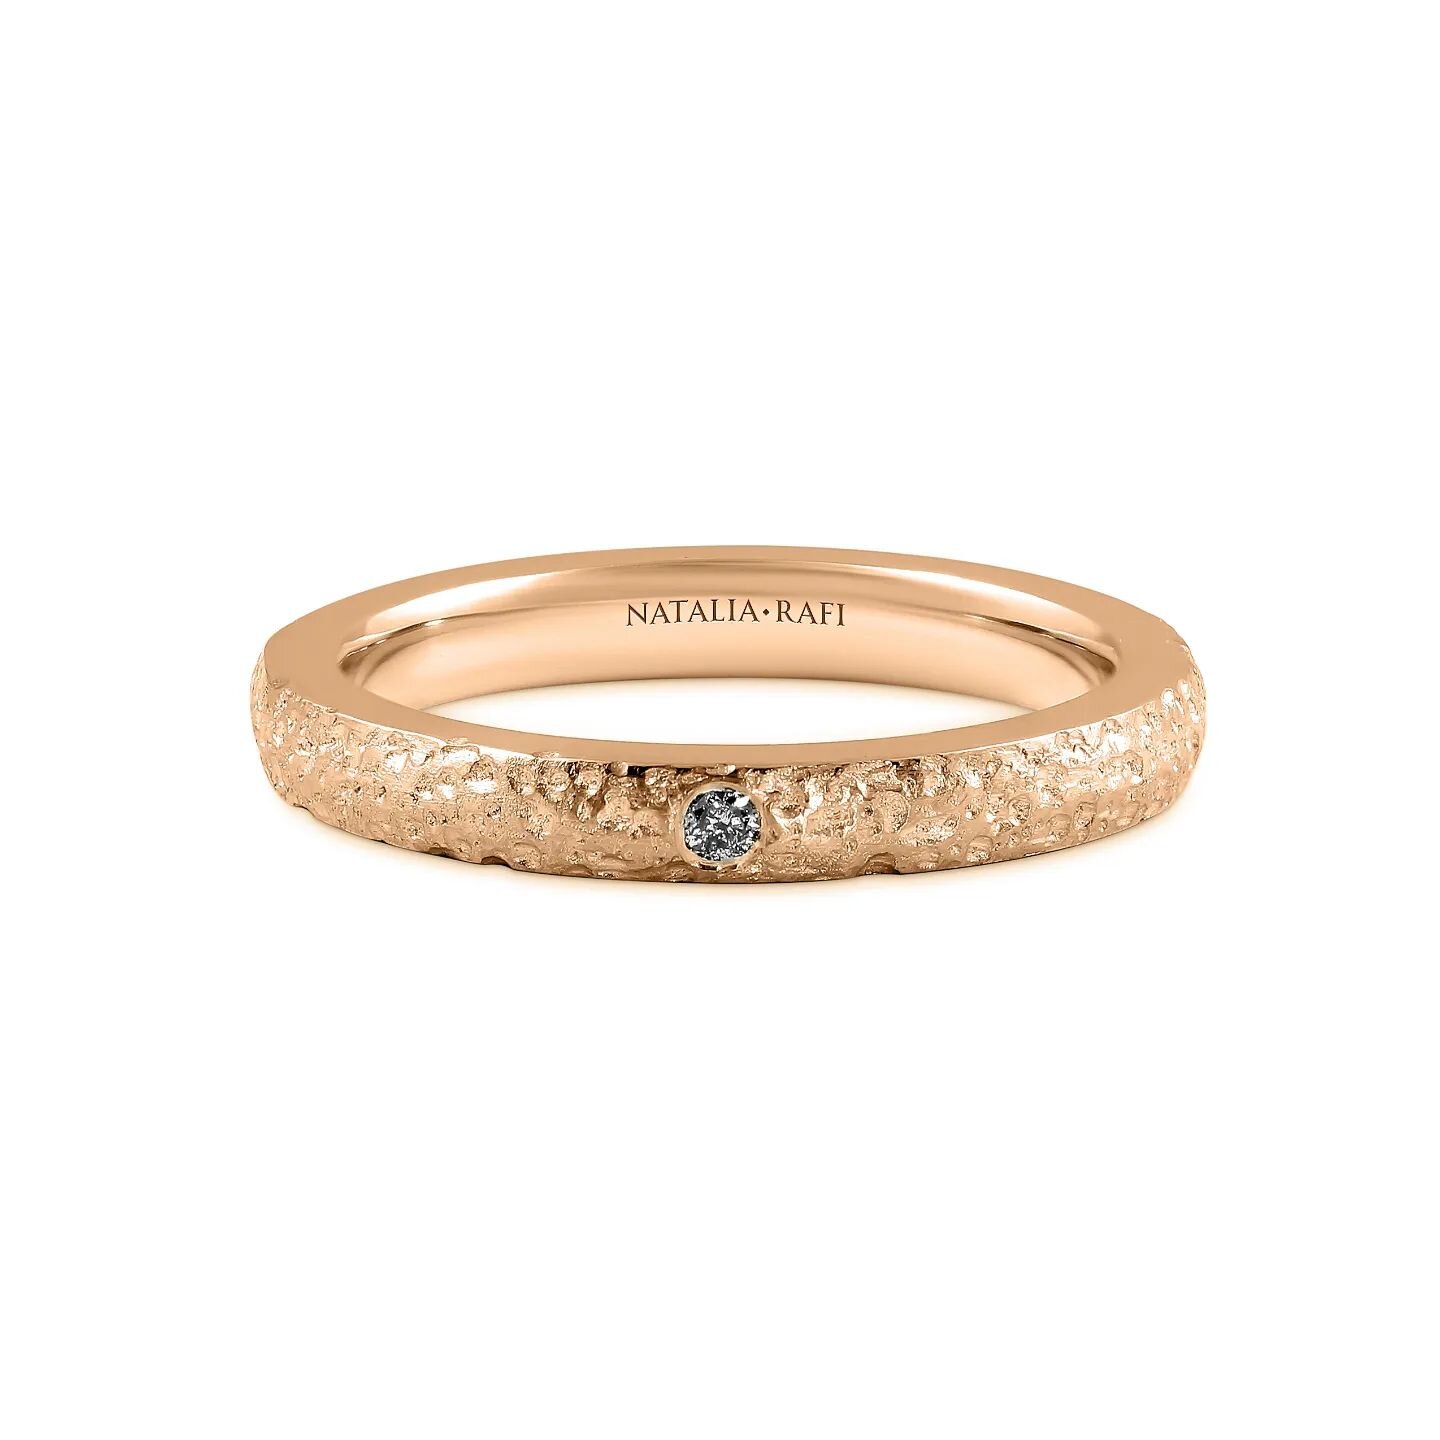 &quot;Bondi&quot; &ndash; our cute 9ct rose gold band ring featuring a refined yet captivating texture. Perfect for every occasion, its subtle yet distinctive design ensures it stands out effortlessly. Versatile enough to stack with other rings or sh